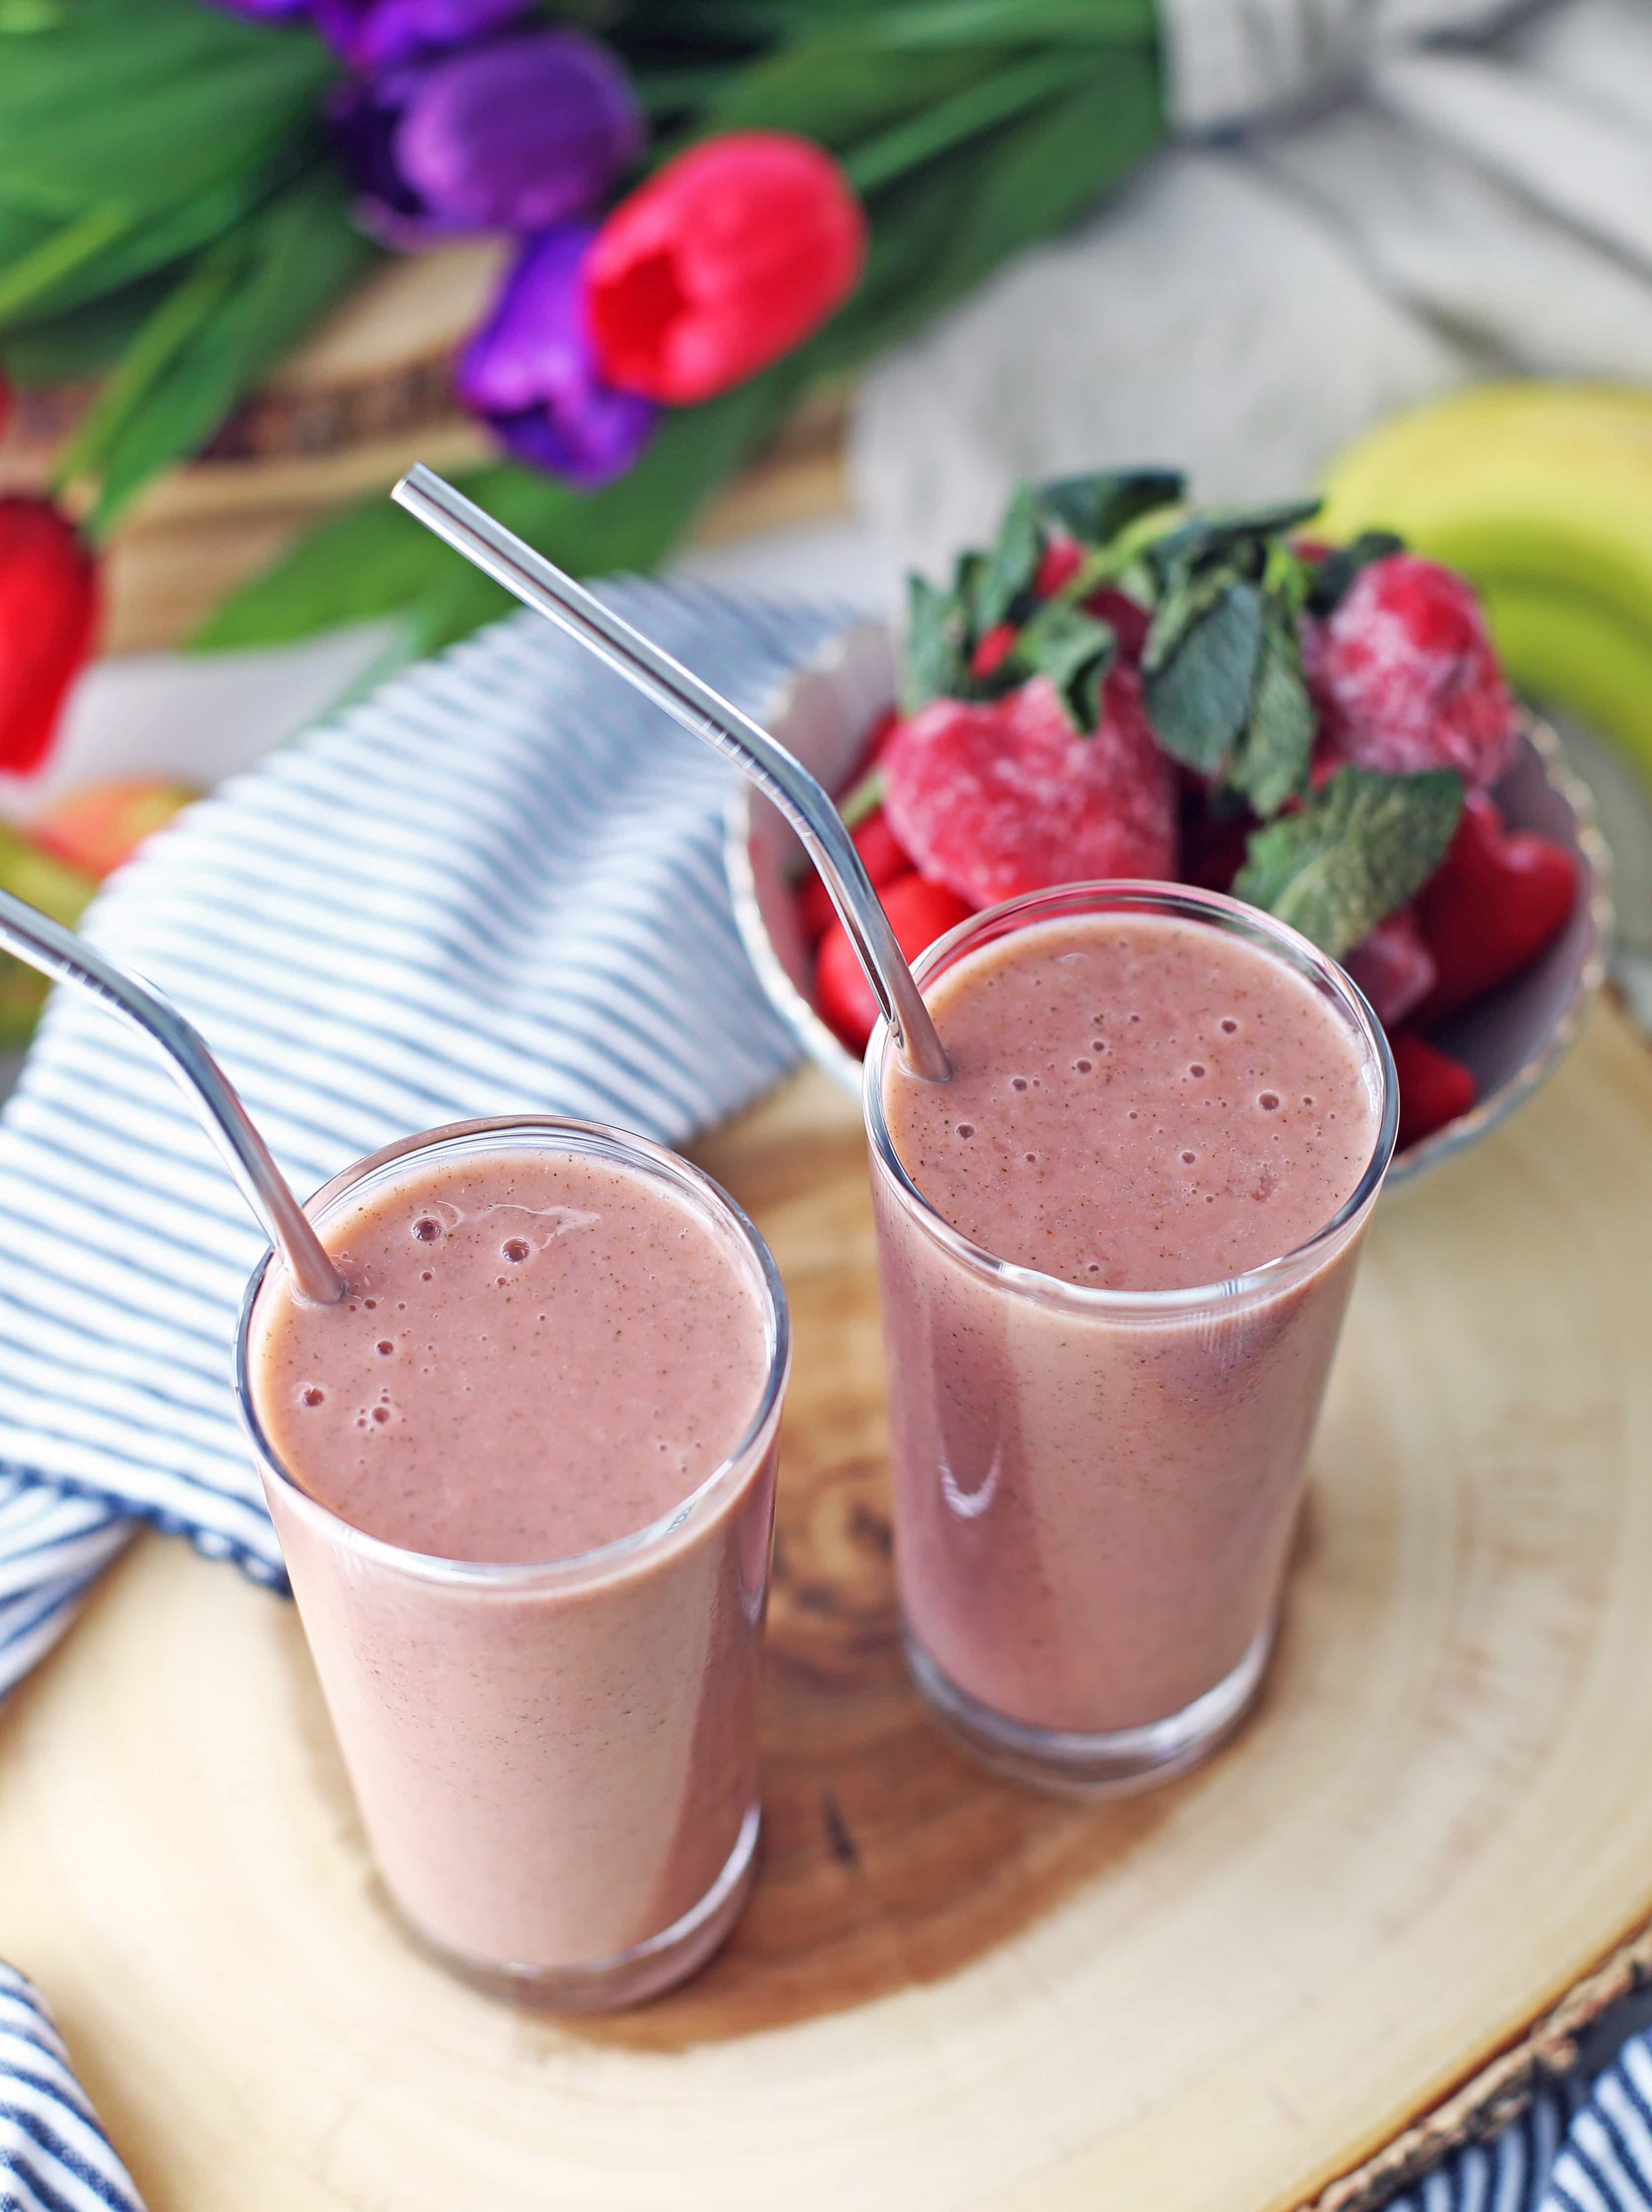 Strawberry mint smoothie in two tall glasses on a wooden platter.